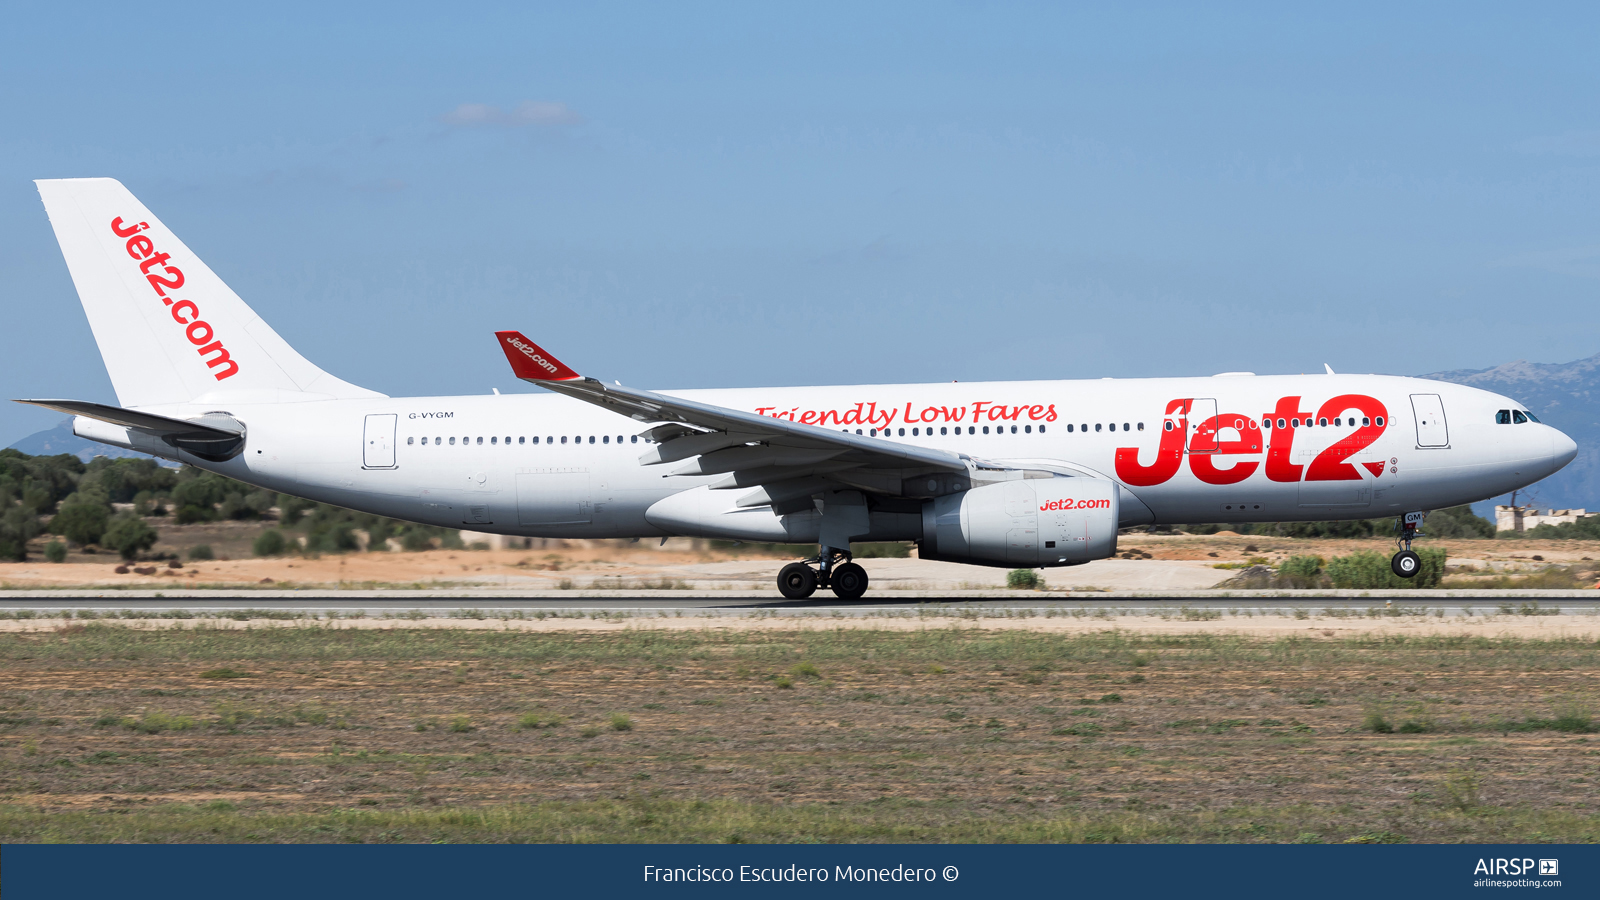 Jet2  Airbus A330-200  G-VYGM